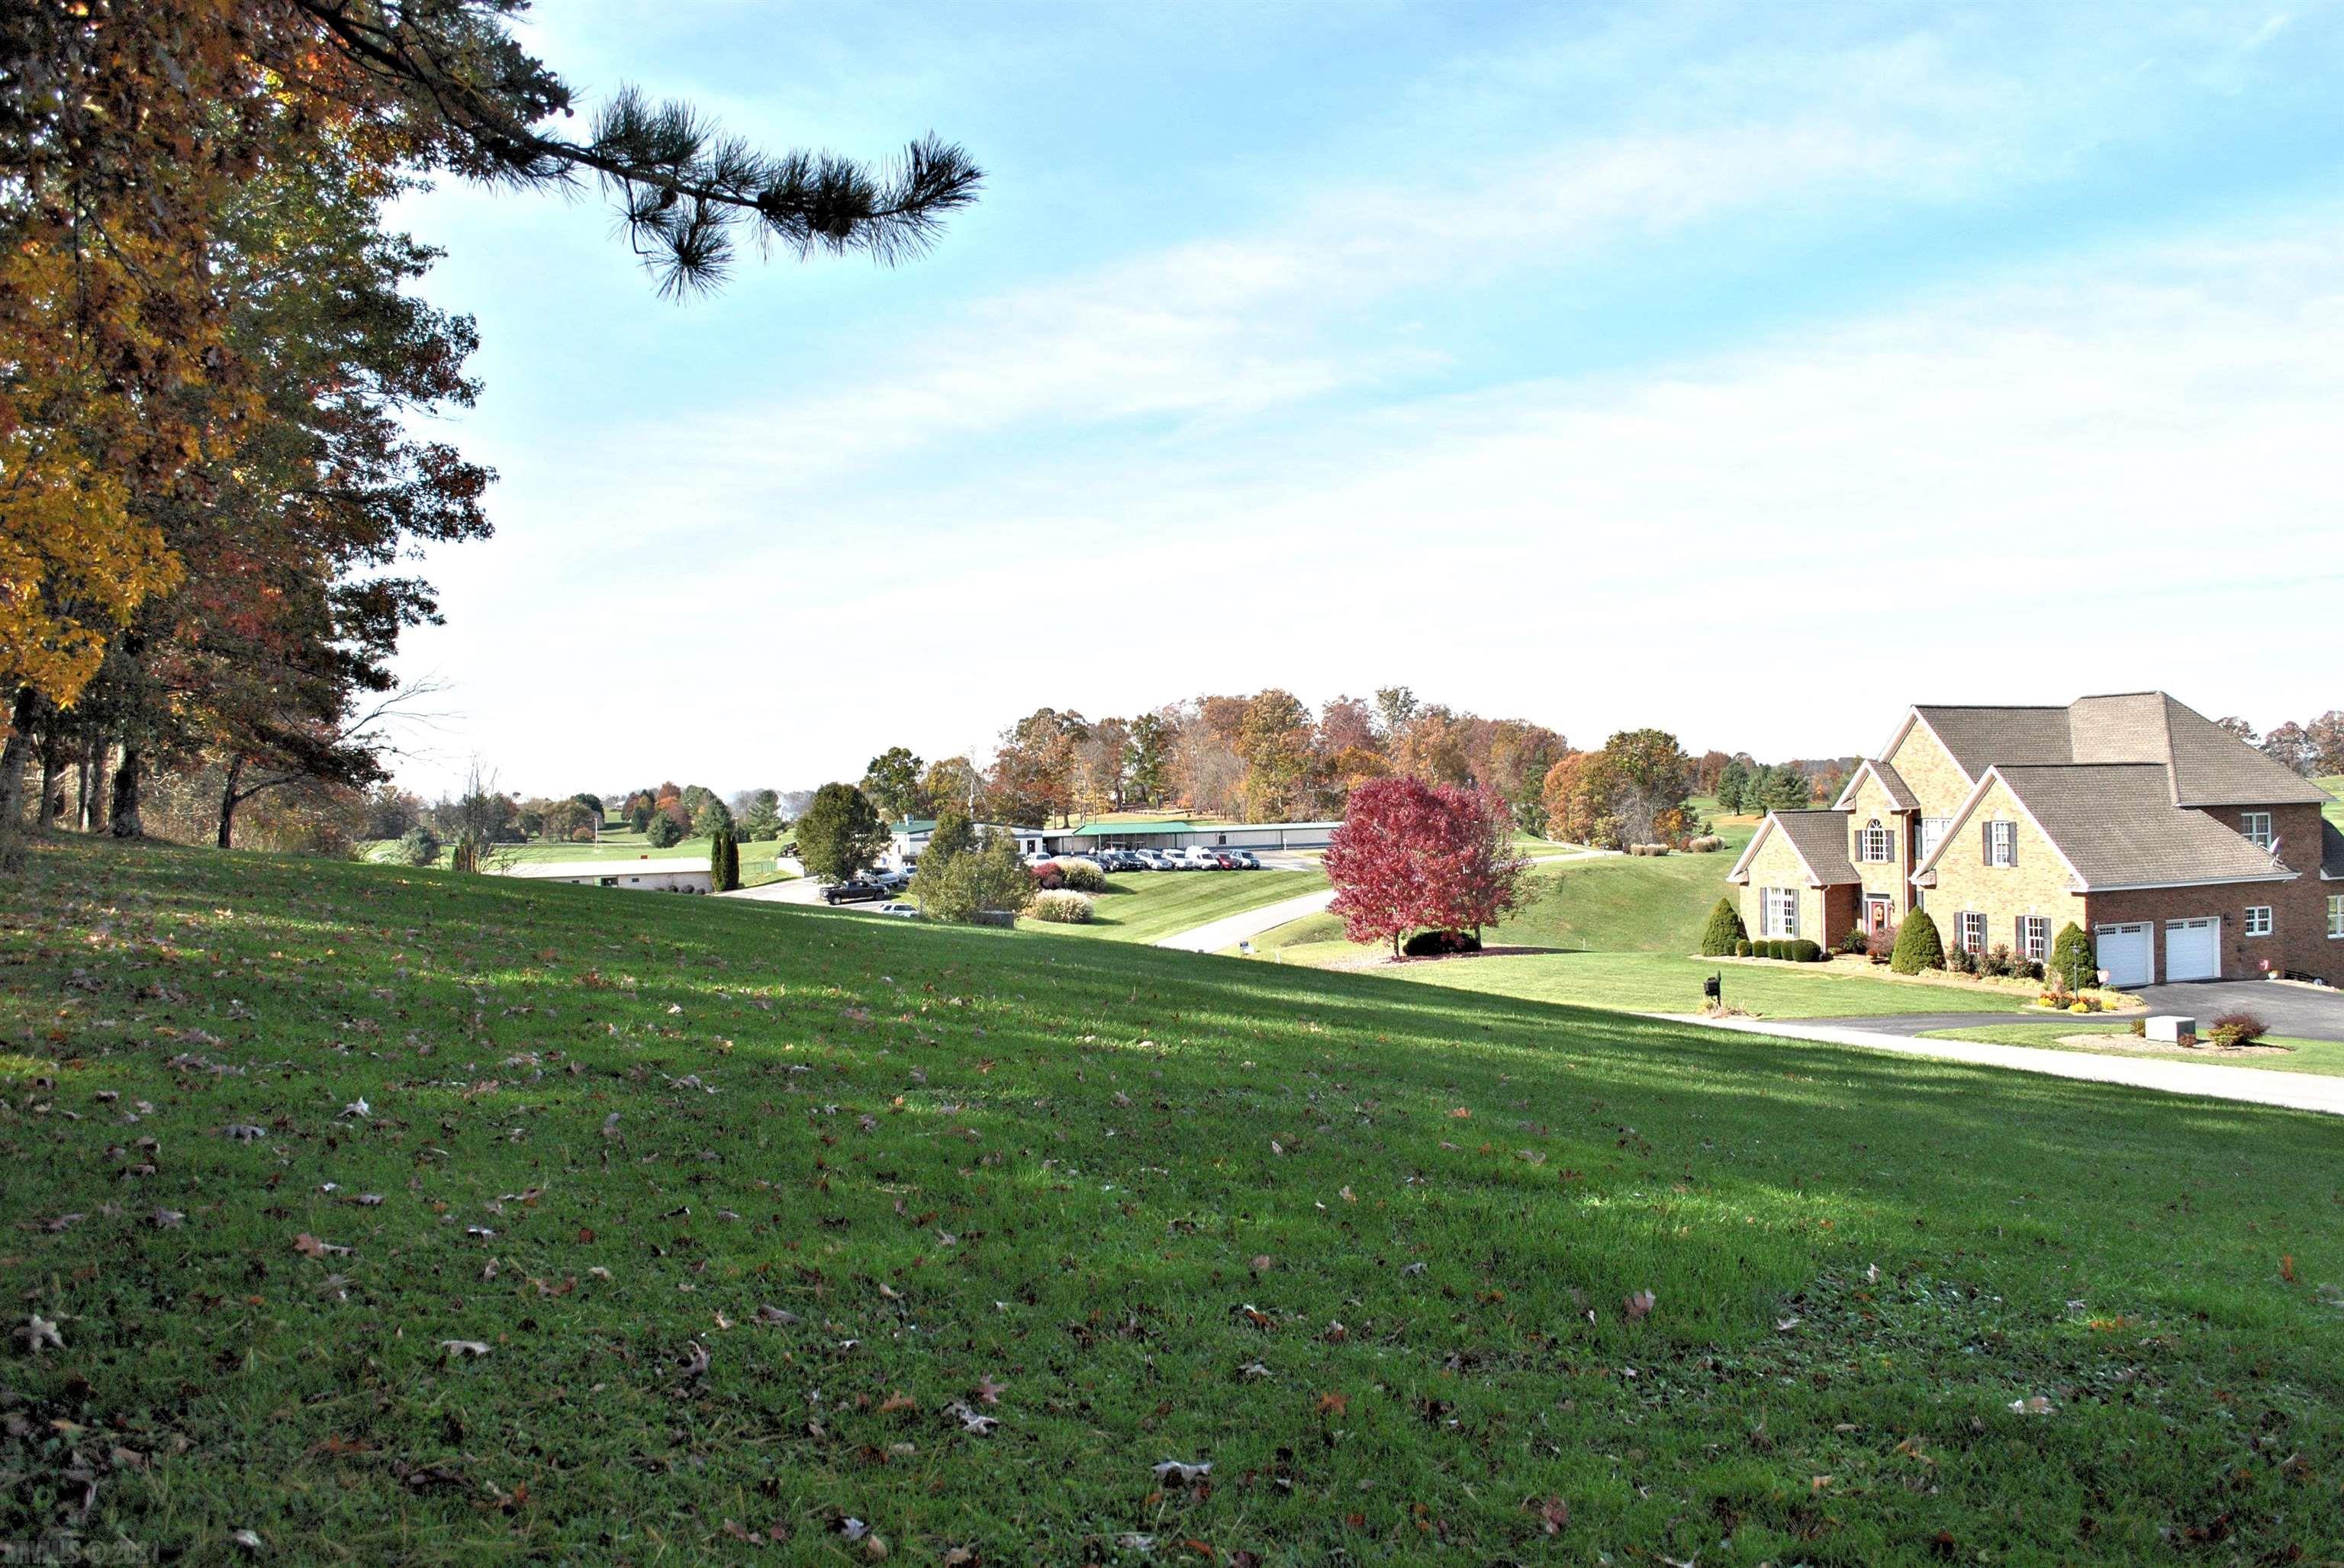 Auburn School District!  Build your dream home on this half acre lot with great views in the gorgeous Auburn Hills Subdivision with no HOA fees. Located a stone's throw from the pool and clubhouse and pro shop, you will feel like you are on vacation every day.  Public water and public sewer is available for your new home!